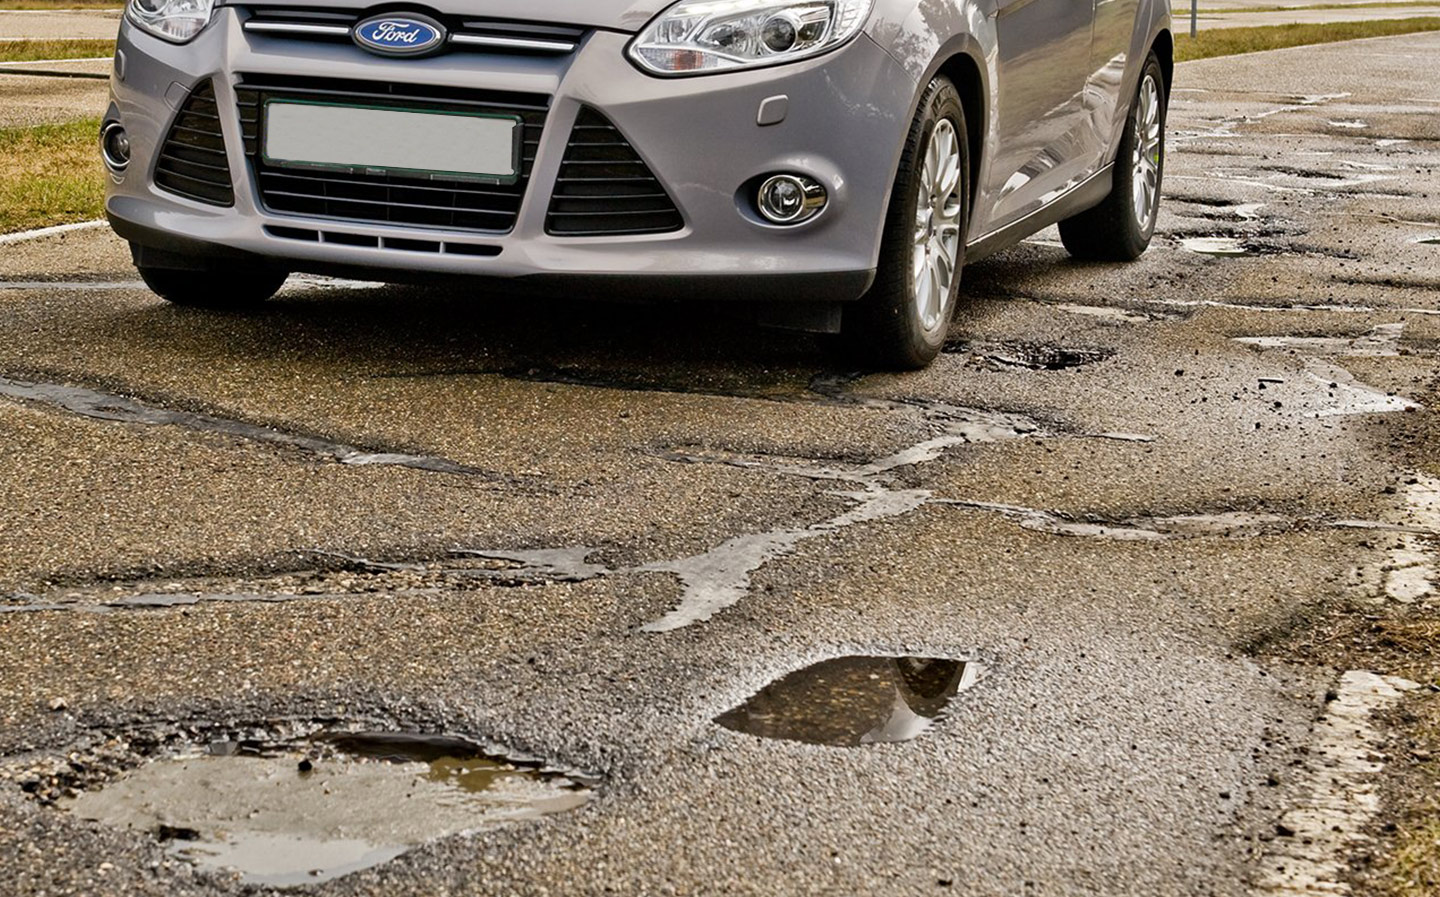 Ford's digital map to warn drivers of potholes